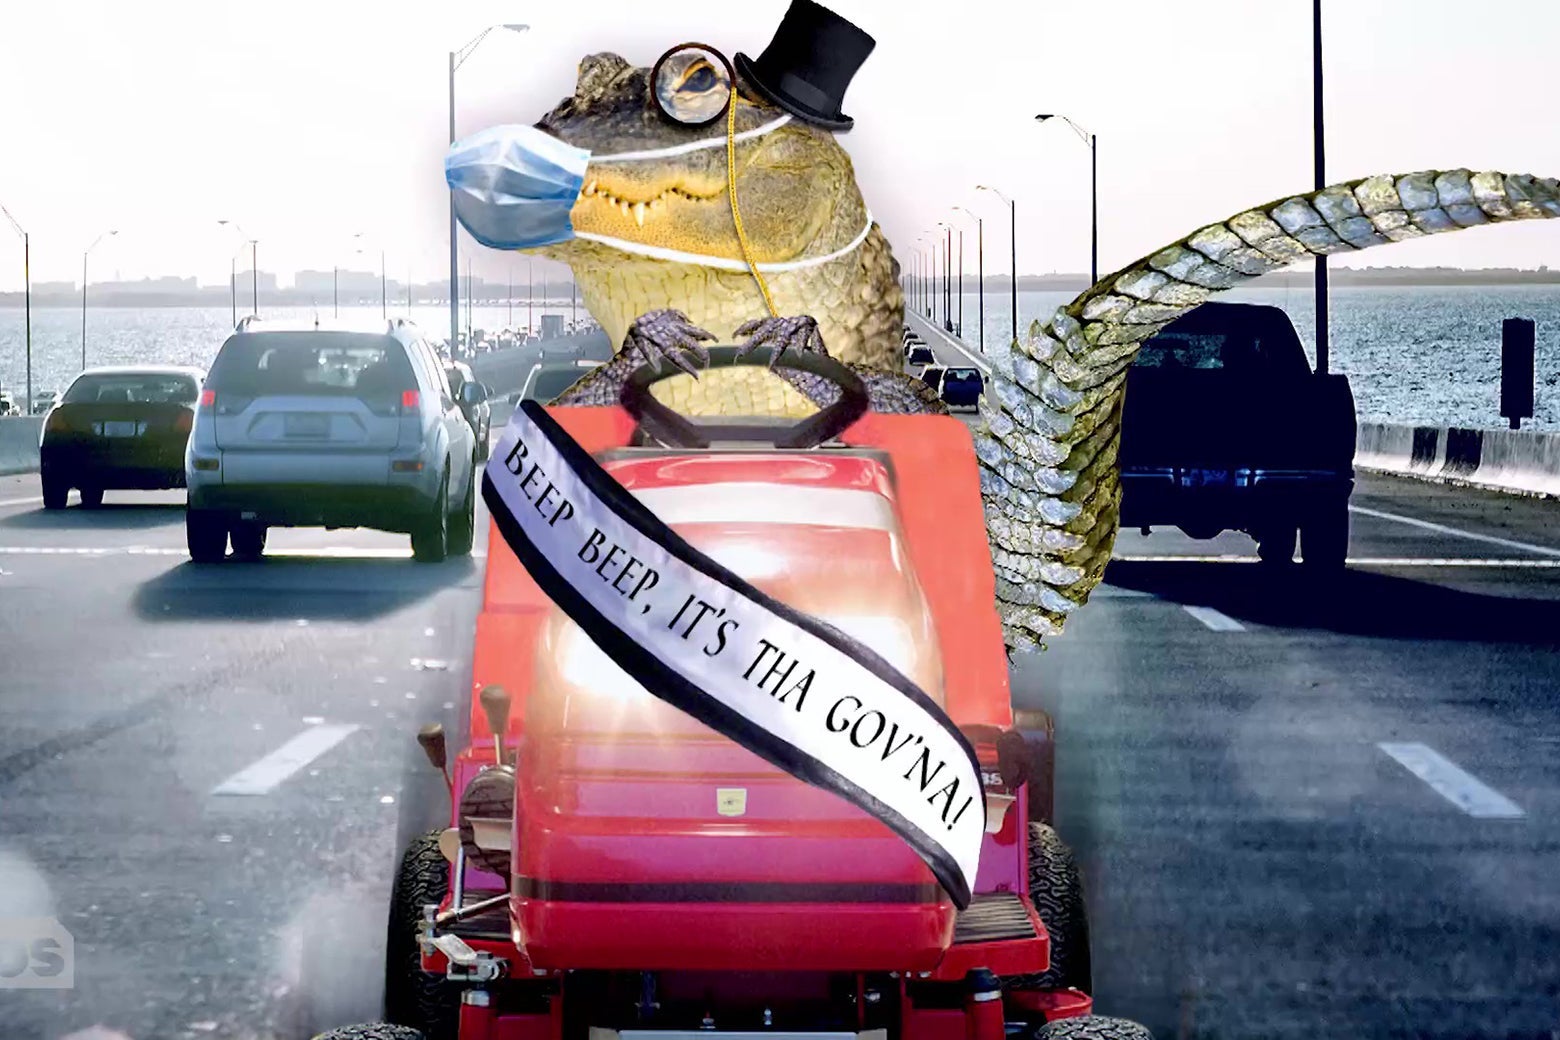 An alligator driving a riding lawn mower down the freeway, wearing a surgical mask, a top hat, a monocle, and a sash reading "Beep beep! It's Tha Gov'na!"